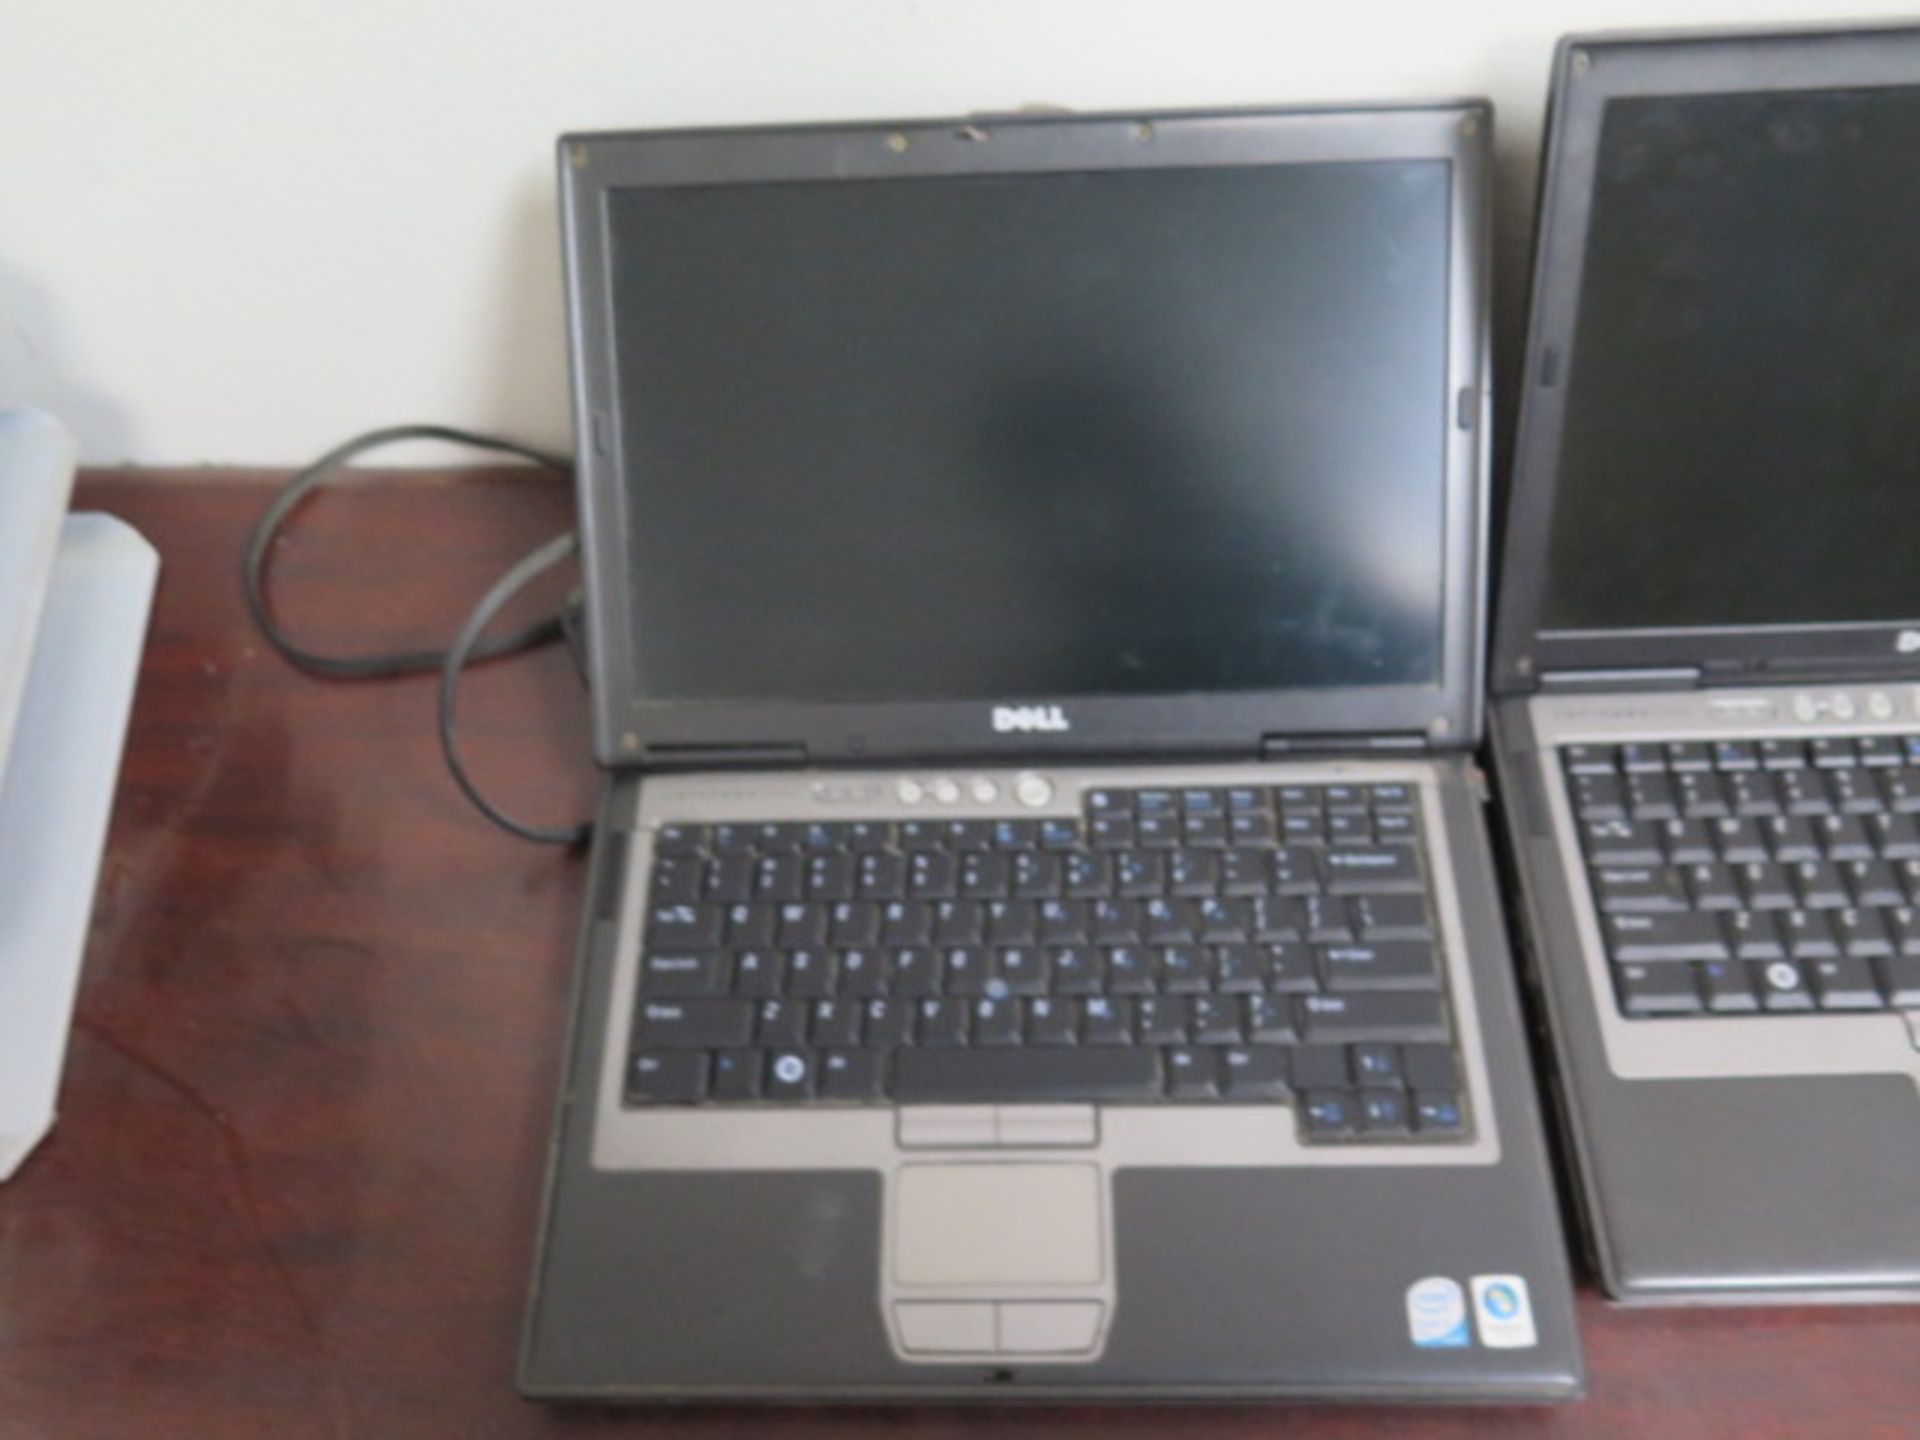 Dell Latitude D630 Laptop Computers (2) (SOLD AS-IS - NO WARRANTY) - Image 4 of 8